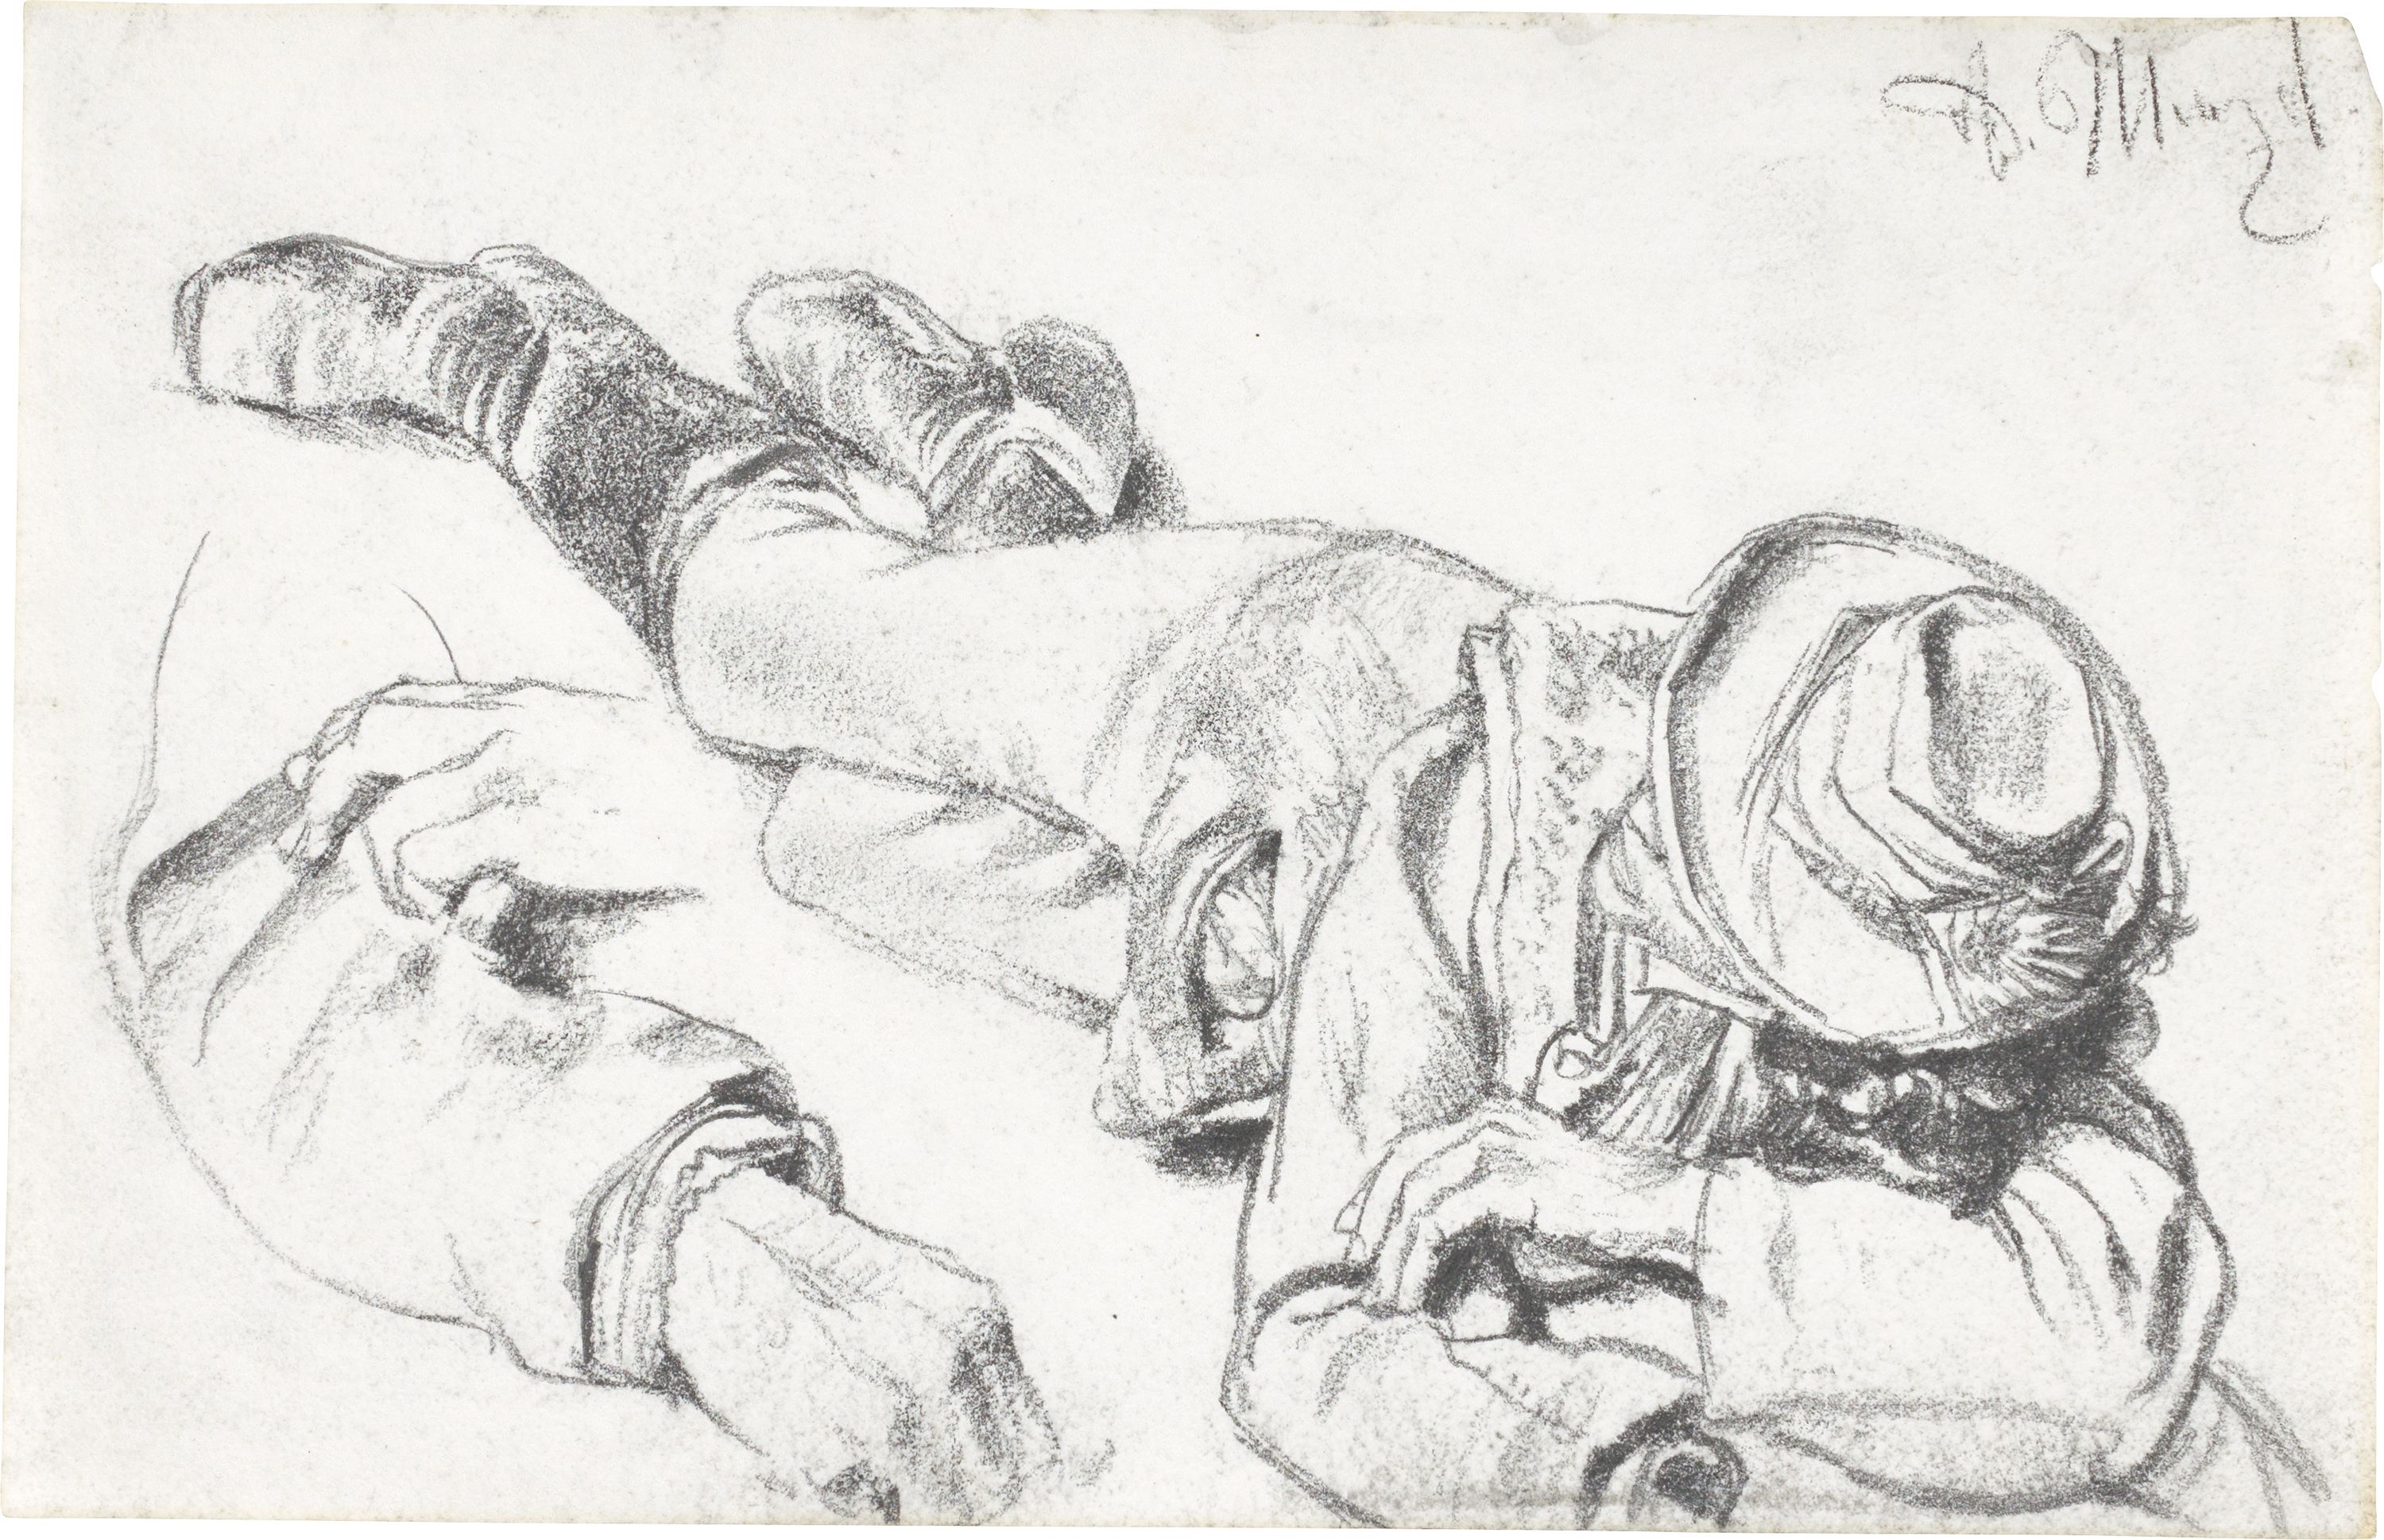 Artwork by Adolph von Menzel, Lying farmer (with arm and hand study), Made of Pencil on paper (from a sketch book)